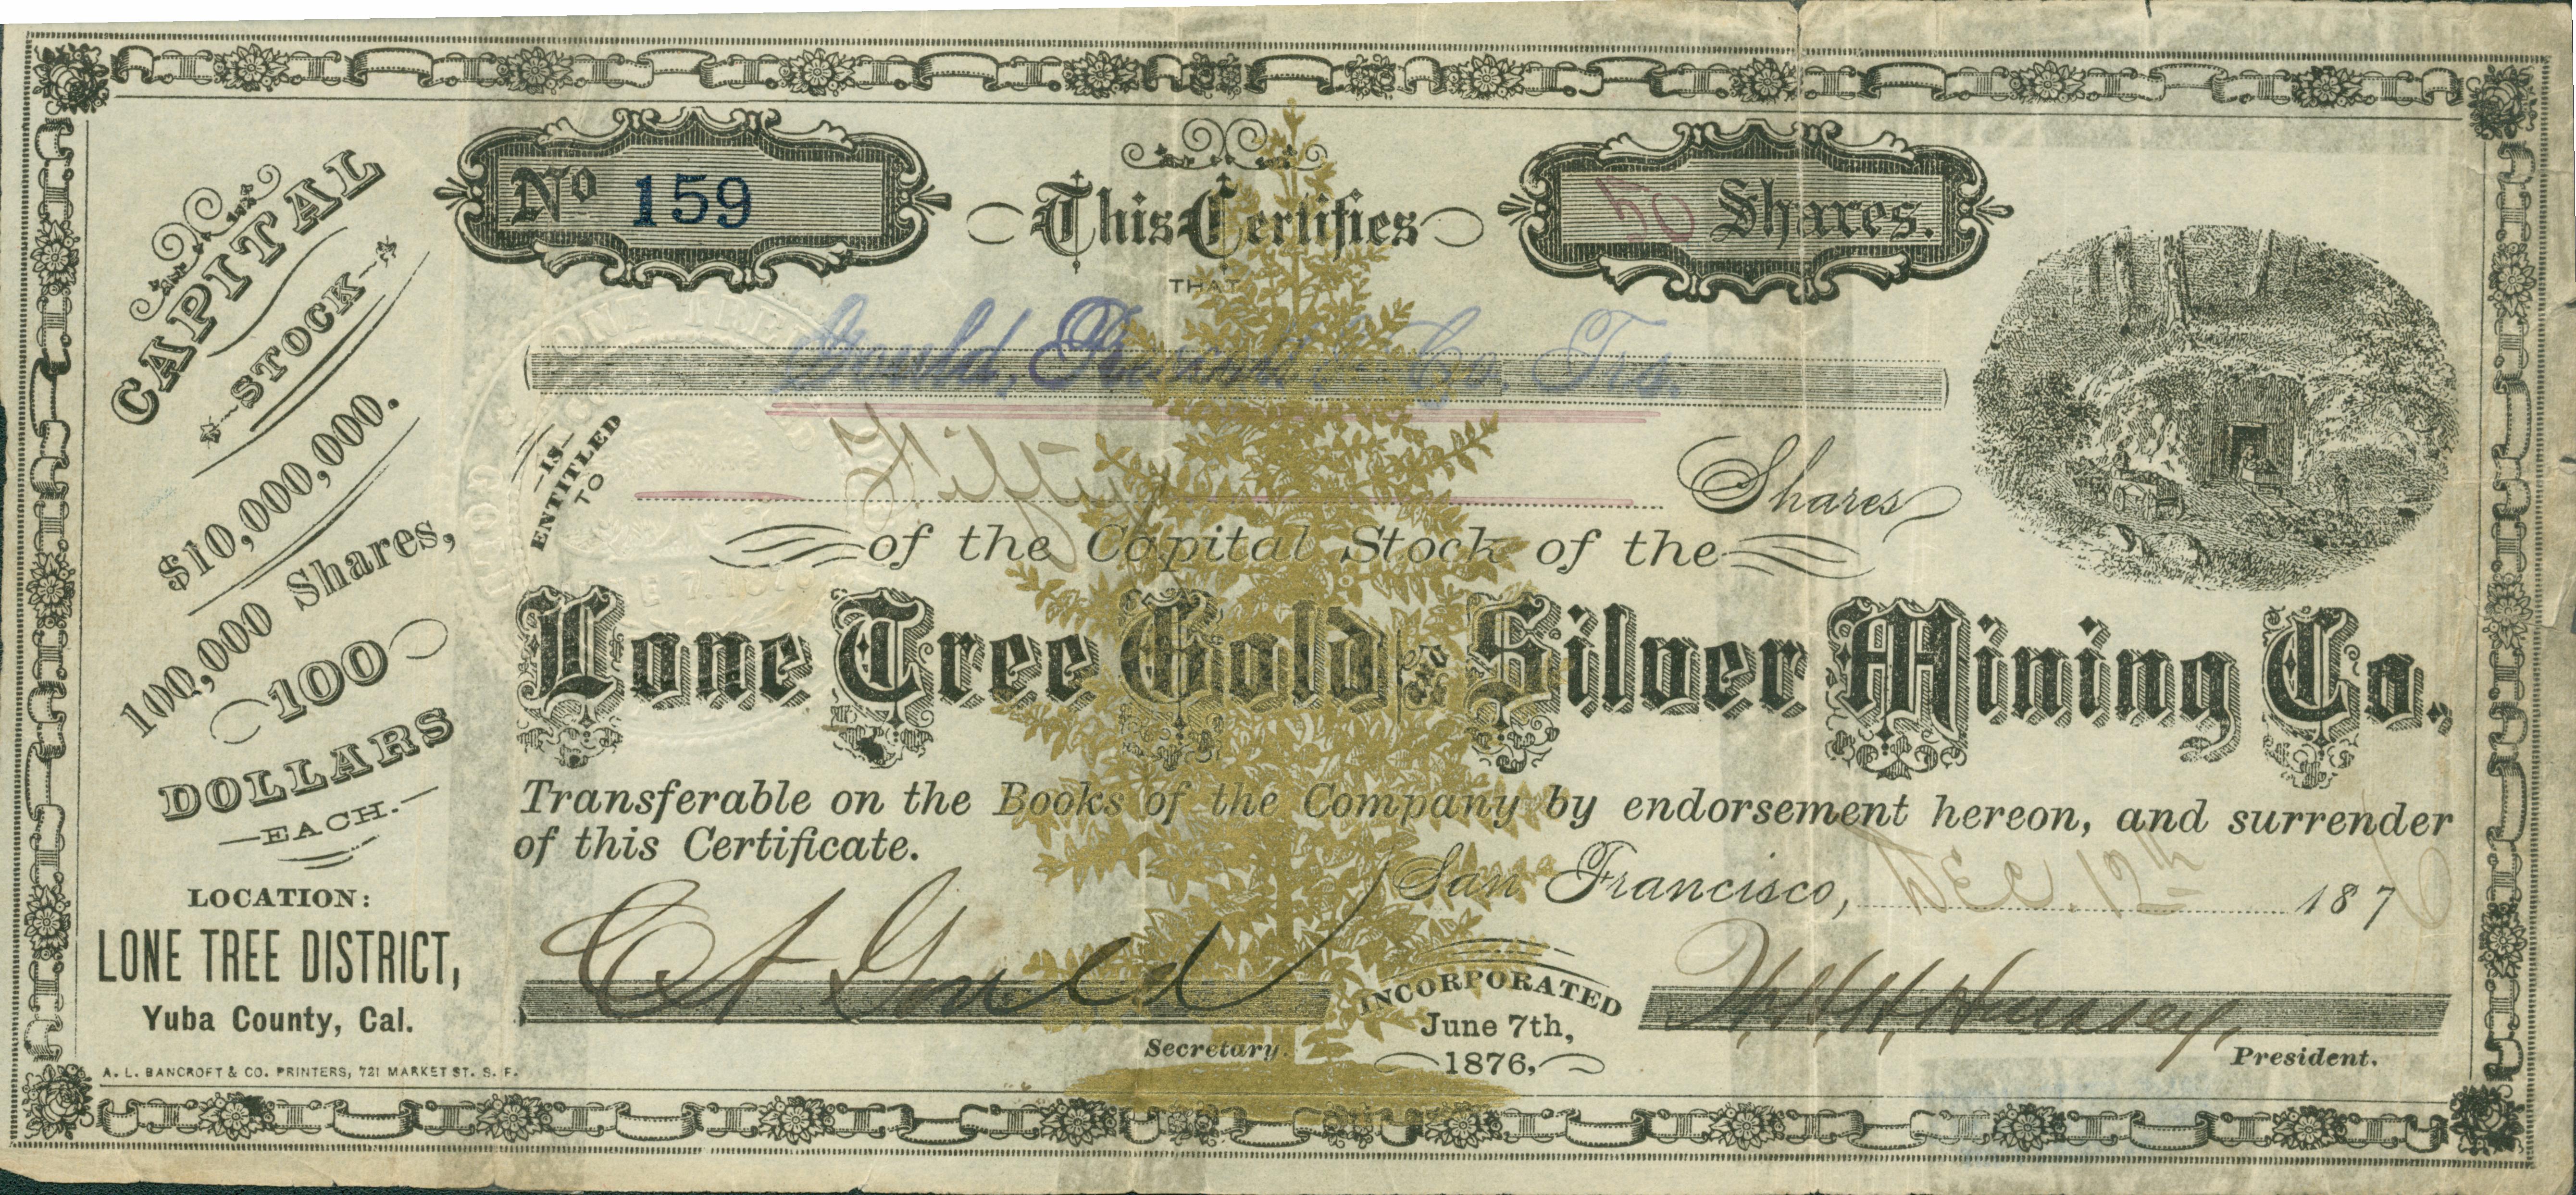 Certificate, No. 159 for 50 Shares for Gould, Piesethler [?], Jrs.
A.L. Bancroft & Co. Printers, San Francisco.